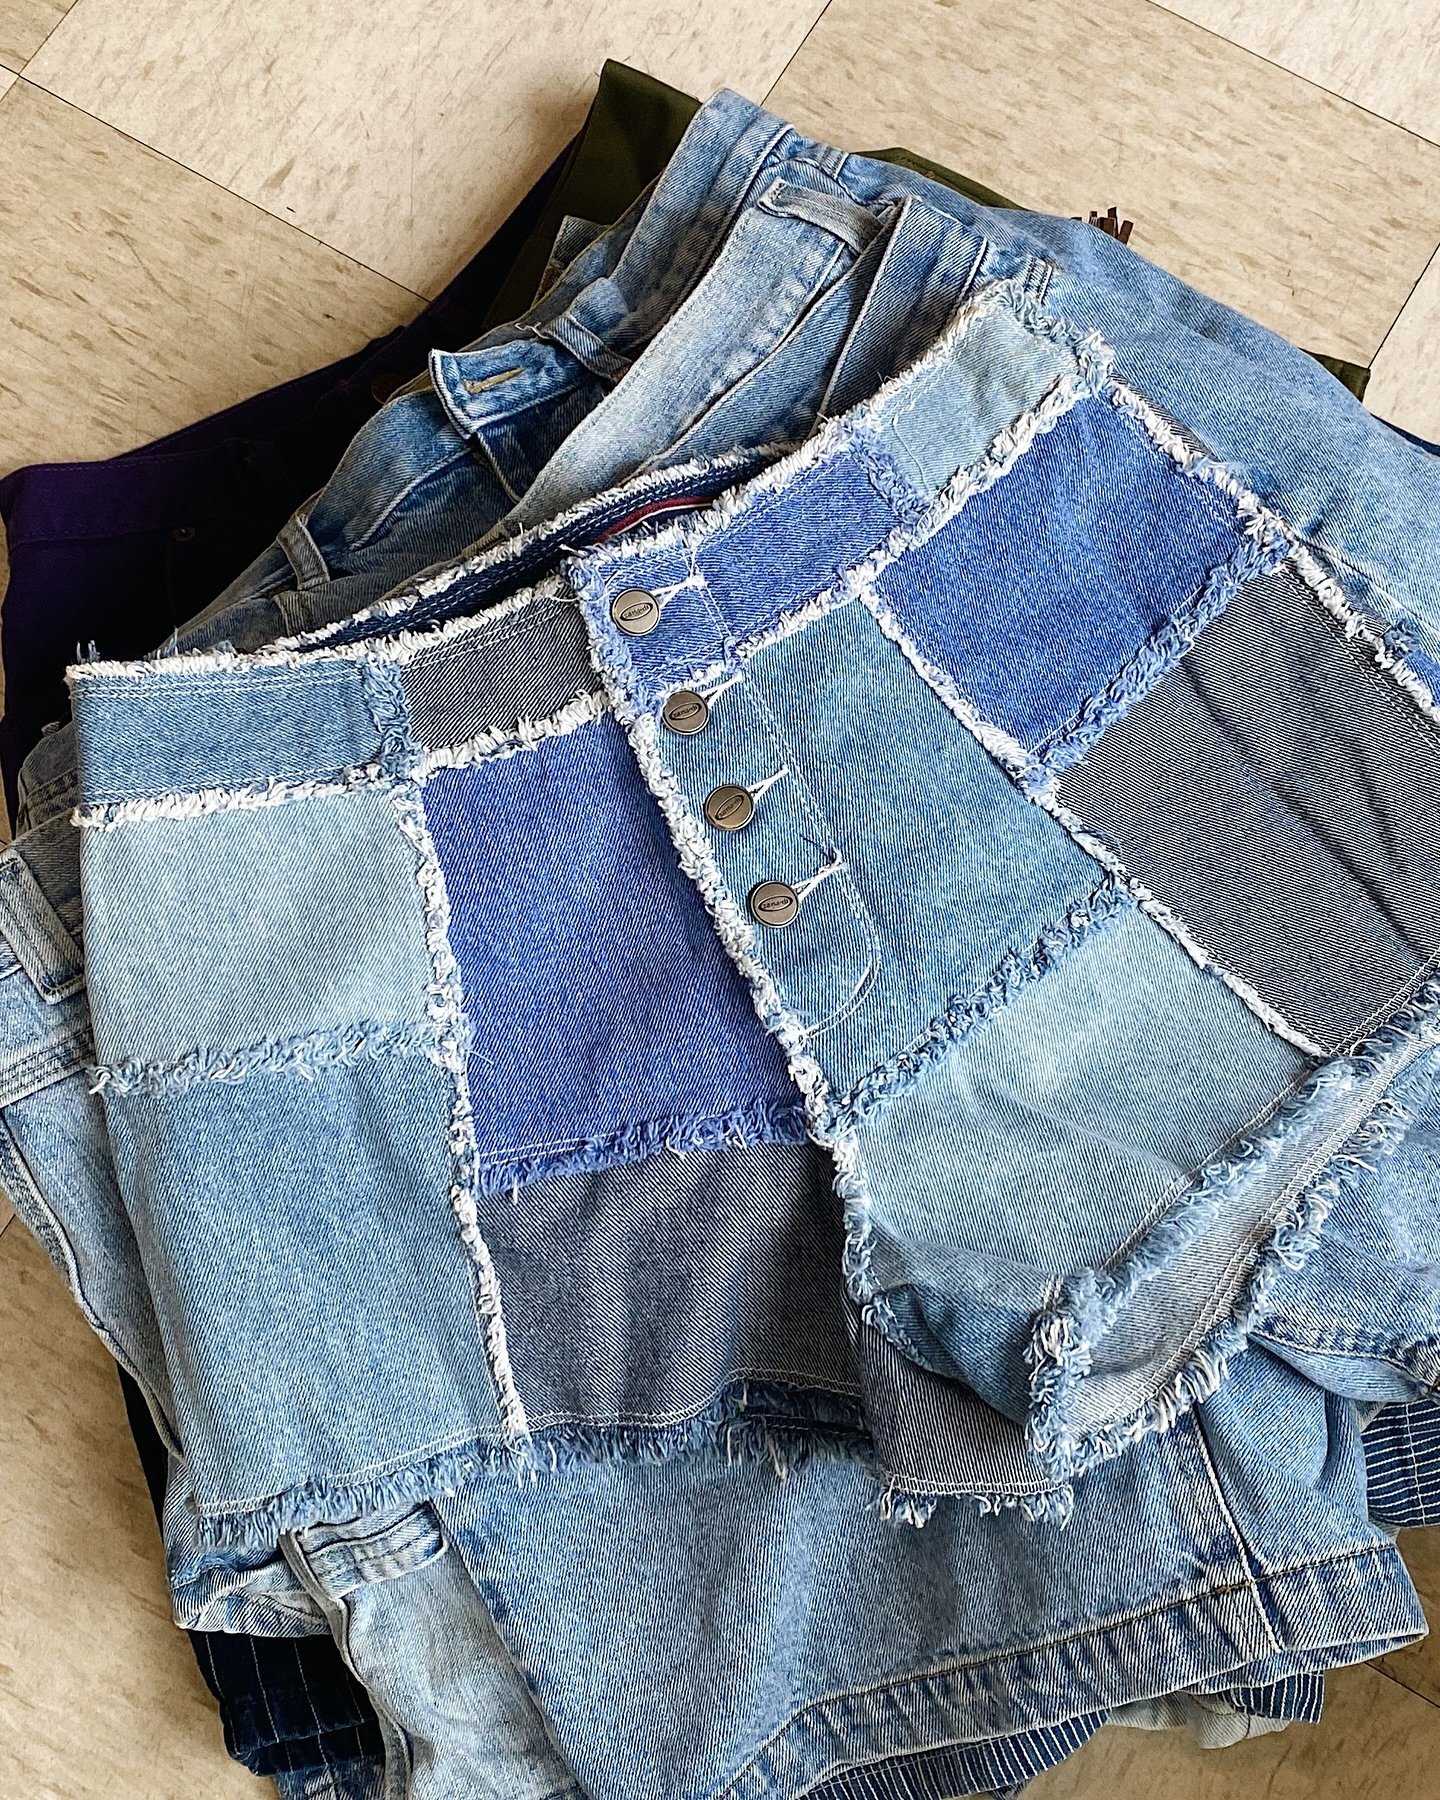 Filmed a while reel showing off all these lovely beauties but Instagram won&rsquo;t let me post. (Let&rsquo;s hope this works) Anyways&hellip;

VINTAGE SHORTS DROP Saturday 4/20 (TOMORROW)! Shop over 50 pairs of vintage denim shorts in-store only.